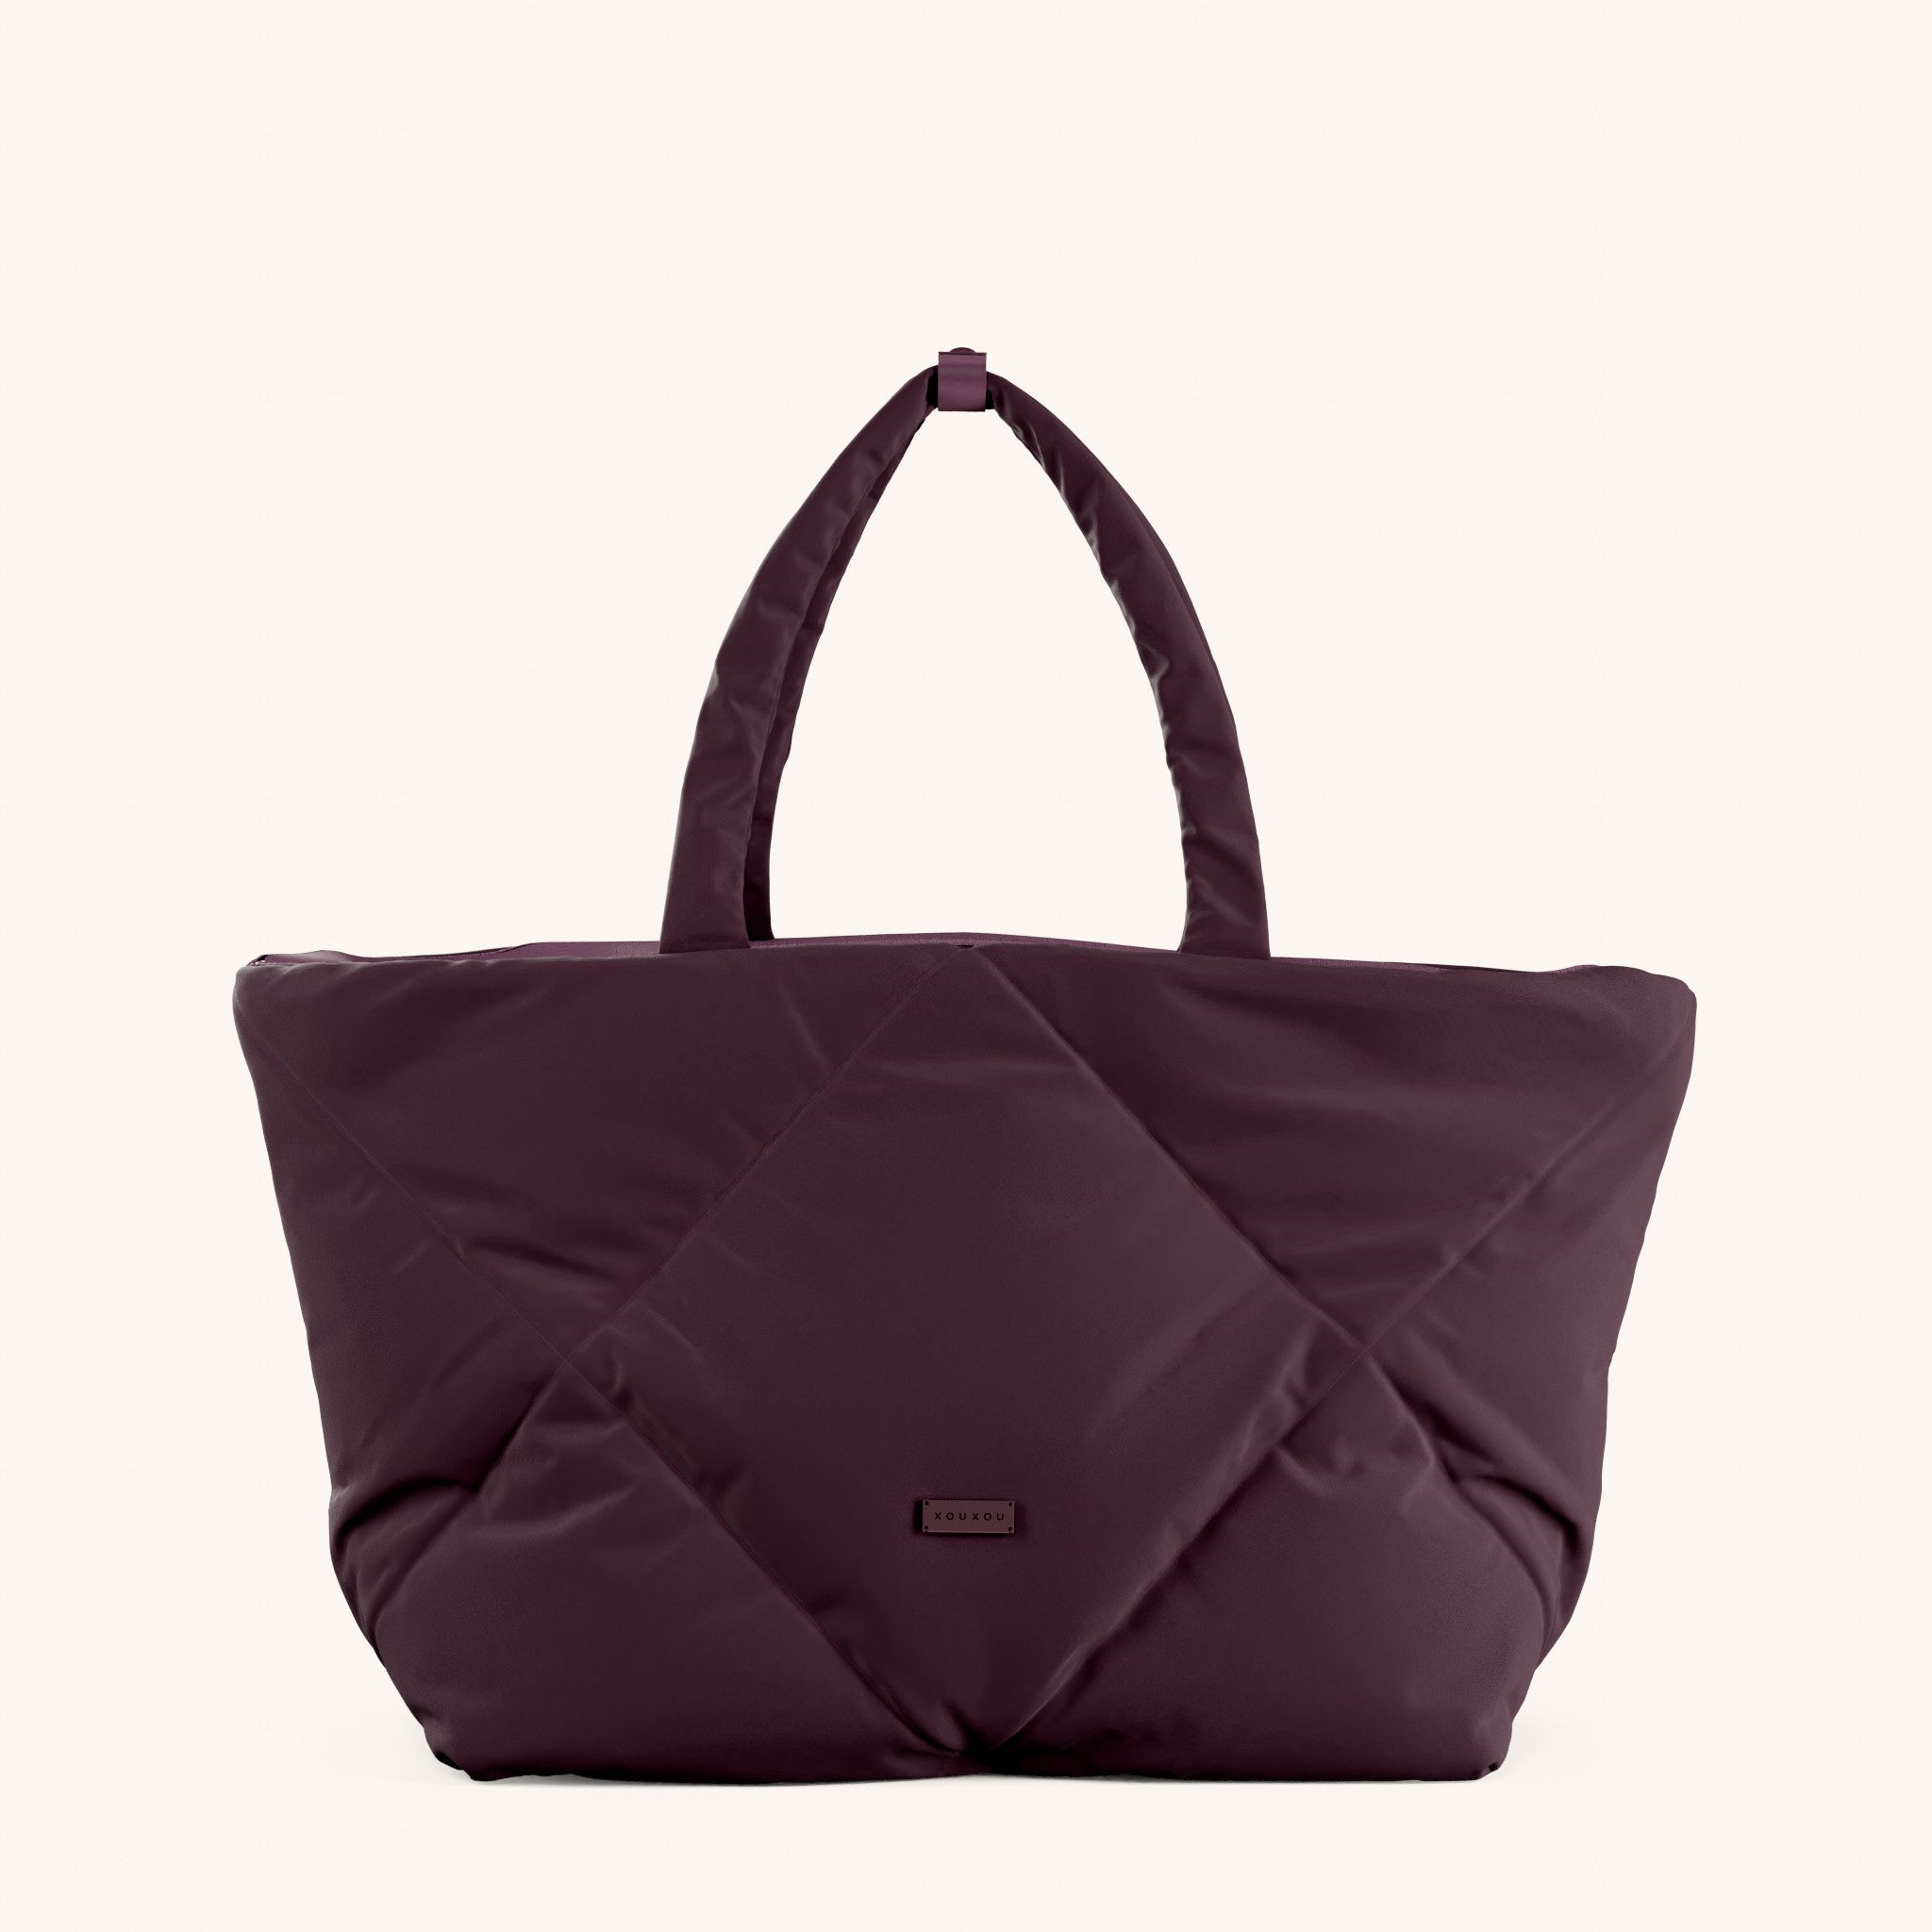 Padded Tote in Burgundy Total View | XOUXOU